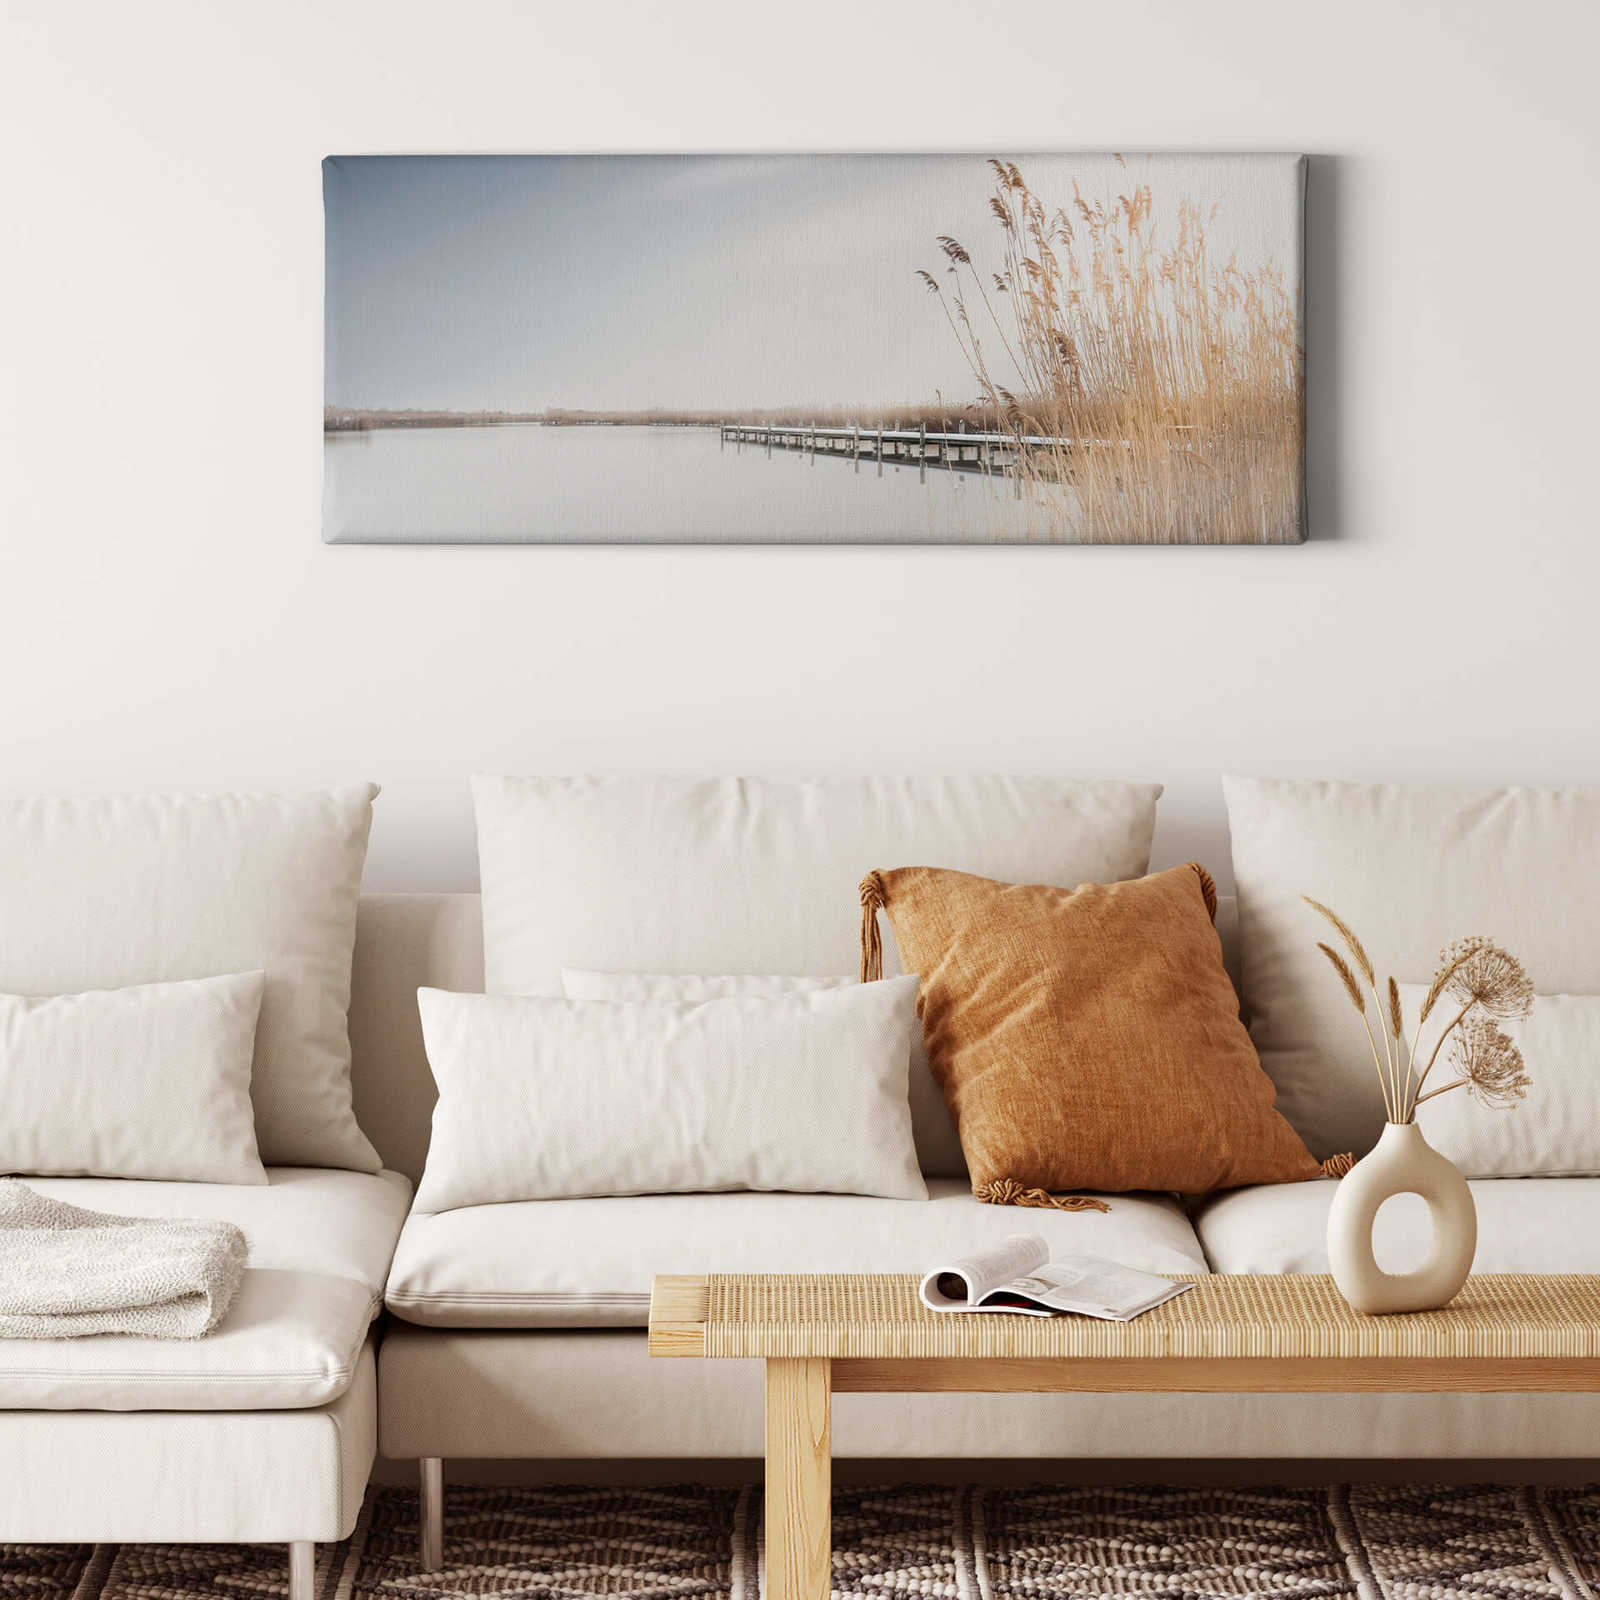             Panoramic canvas print of reeds on the lake
        